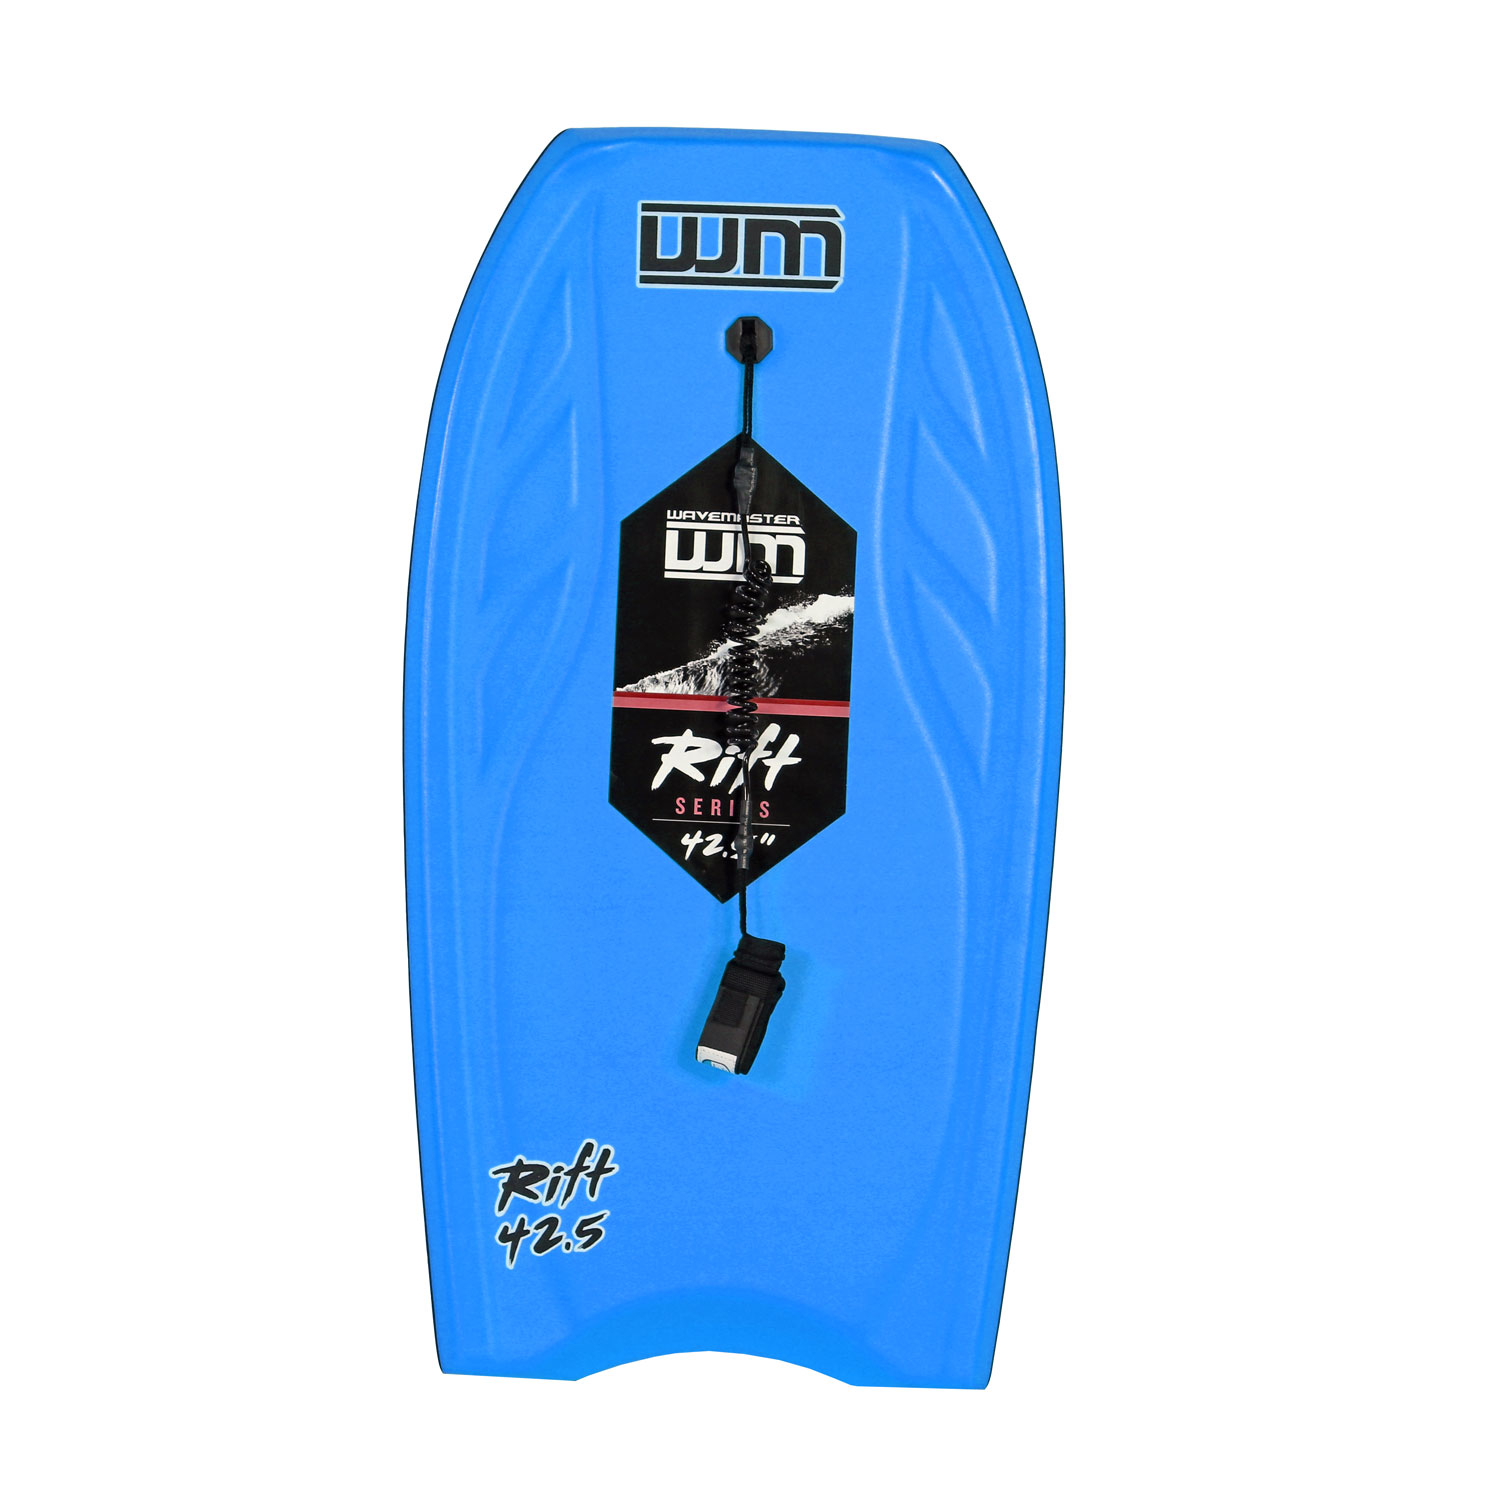 Buy inch Ultimate Pro Hard Slick Bodyboard Boogie Board with Grip Rail and Coiled Wrist Leash Online in Bahrain.